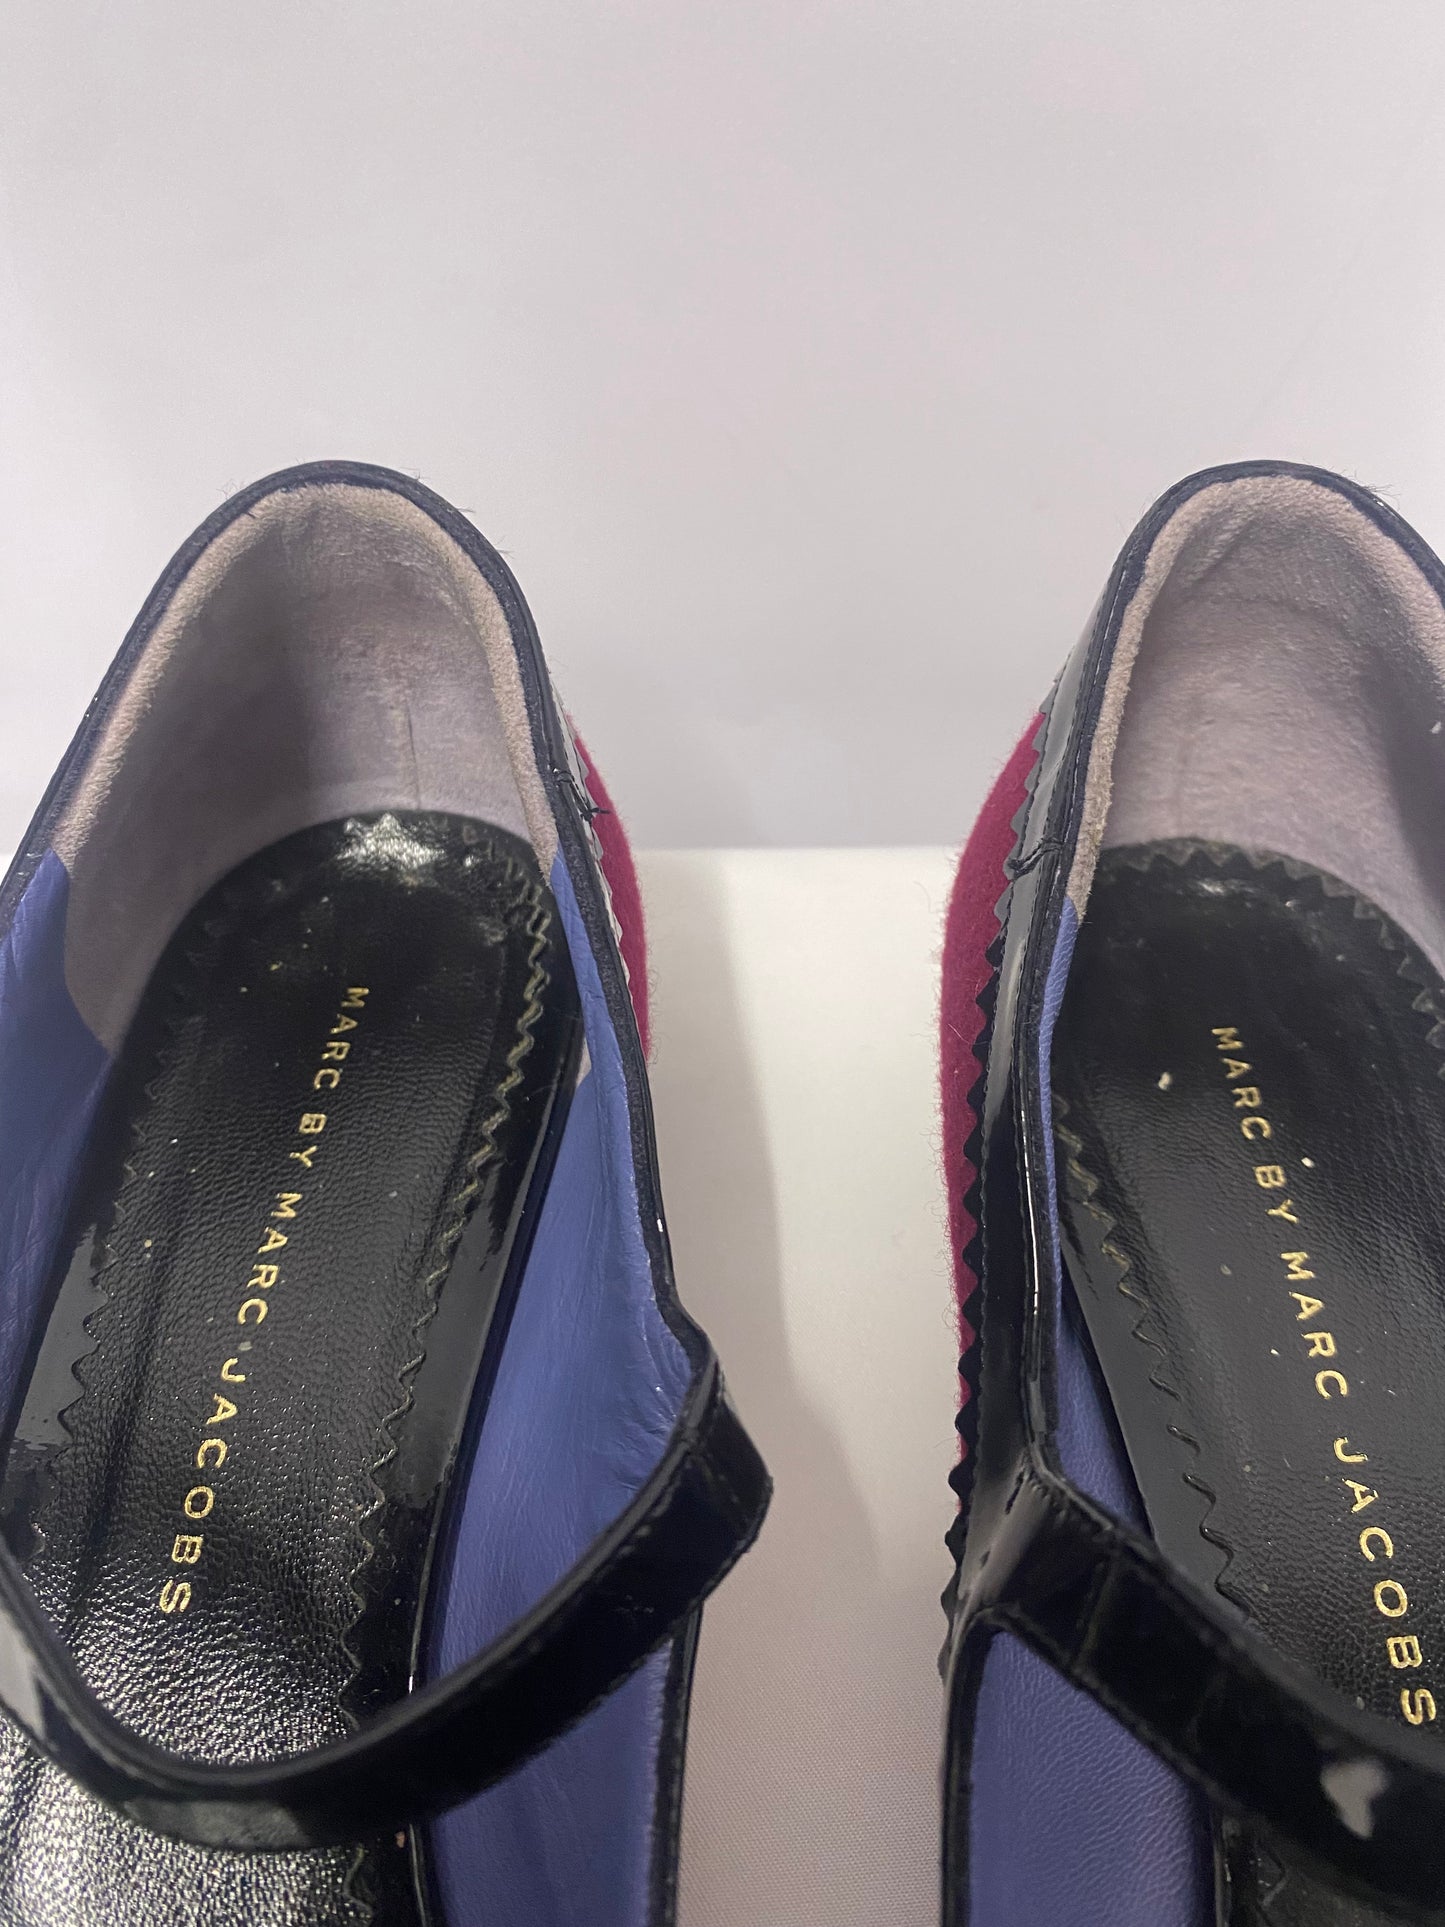 Marc by Marc Jacobs Burgundy and Black Mary Janes 6